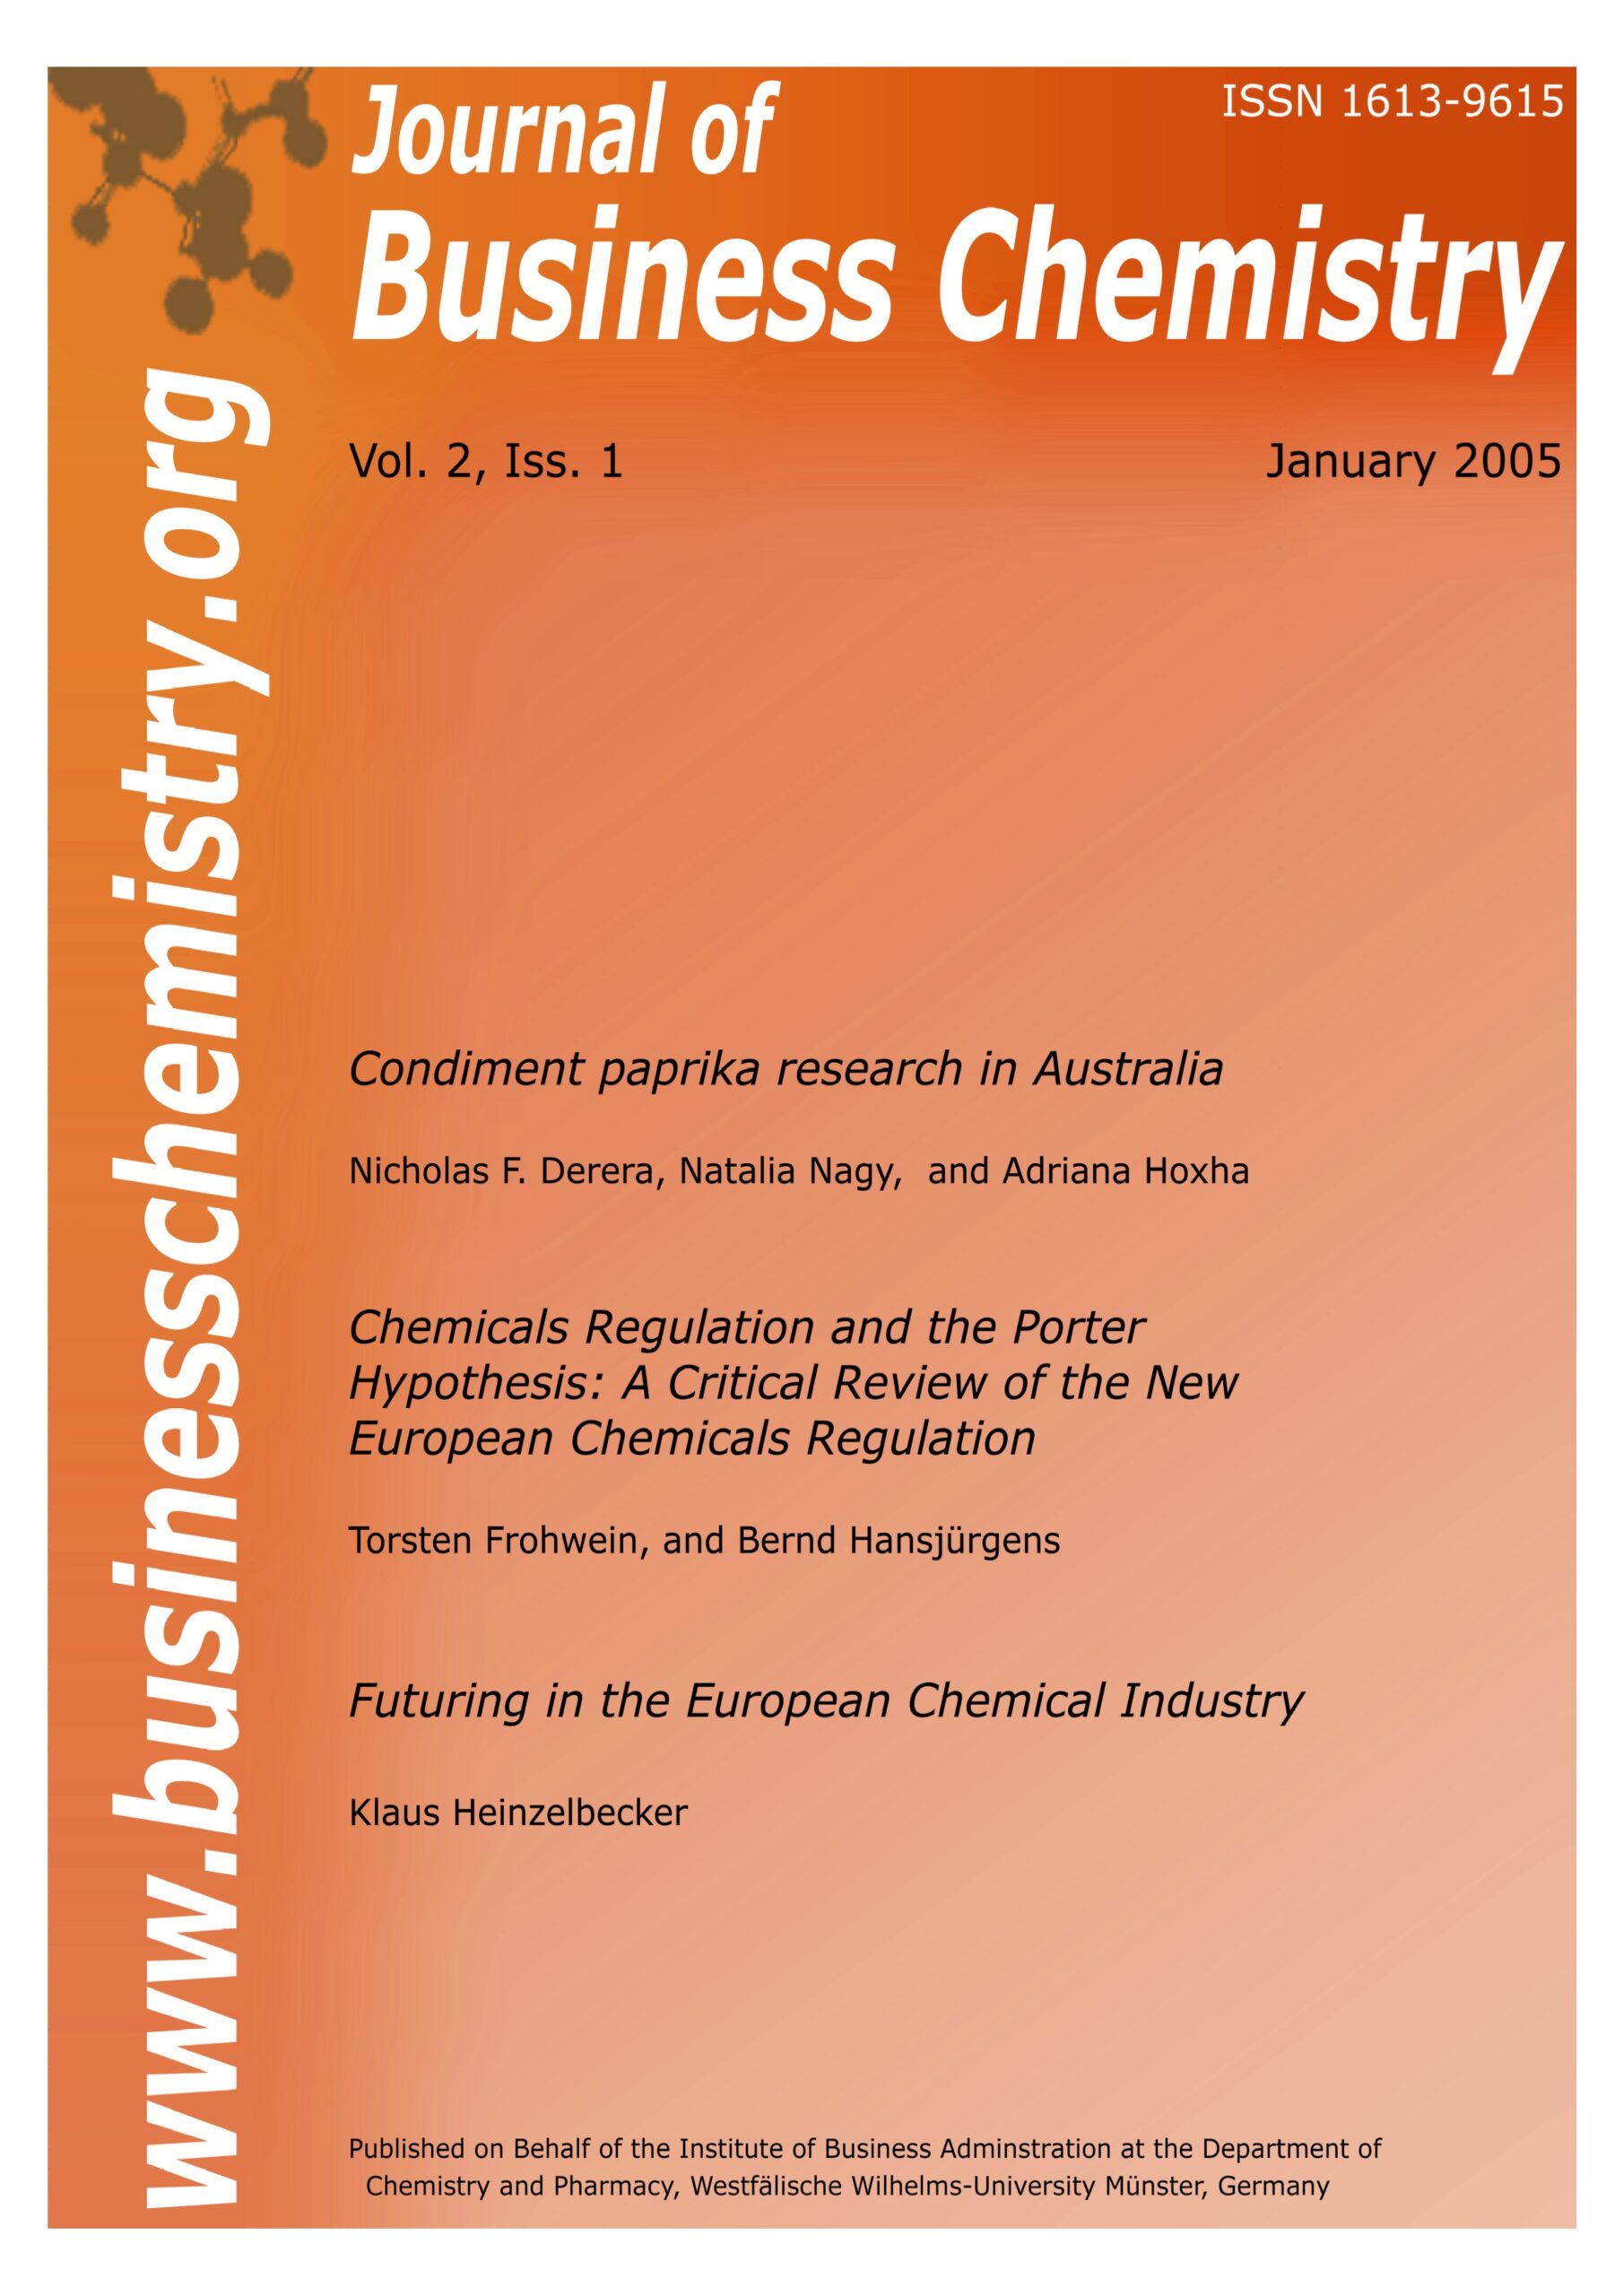 Journal of Business Chemistry January 2005